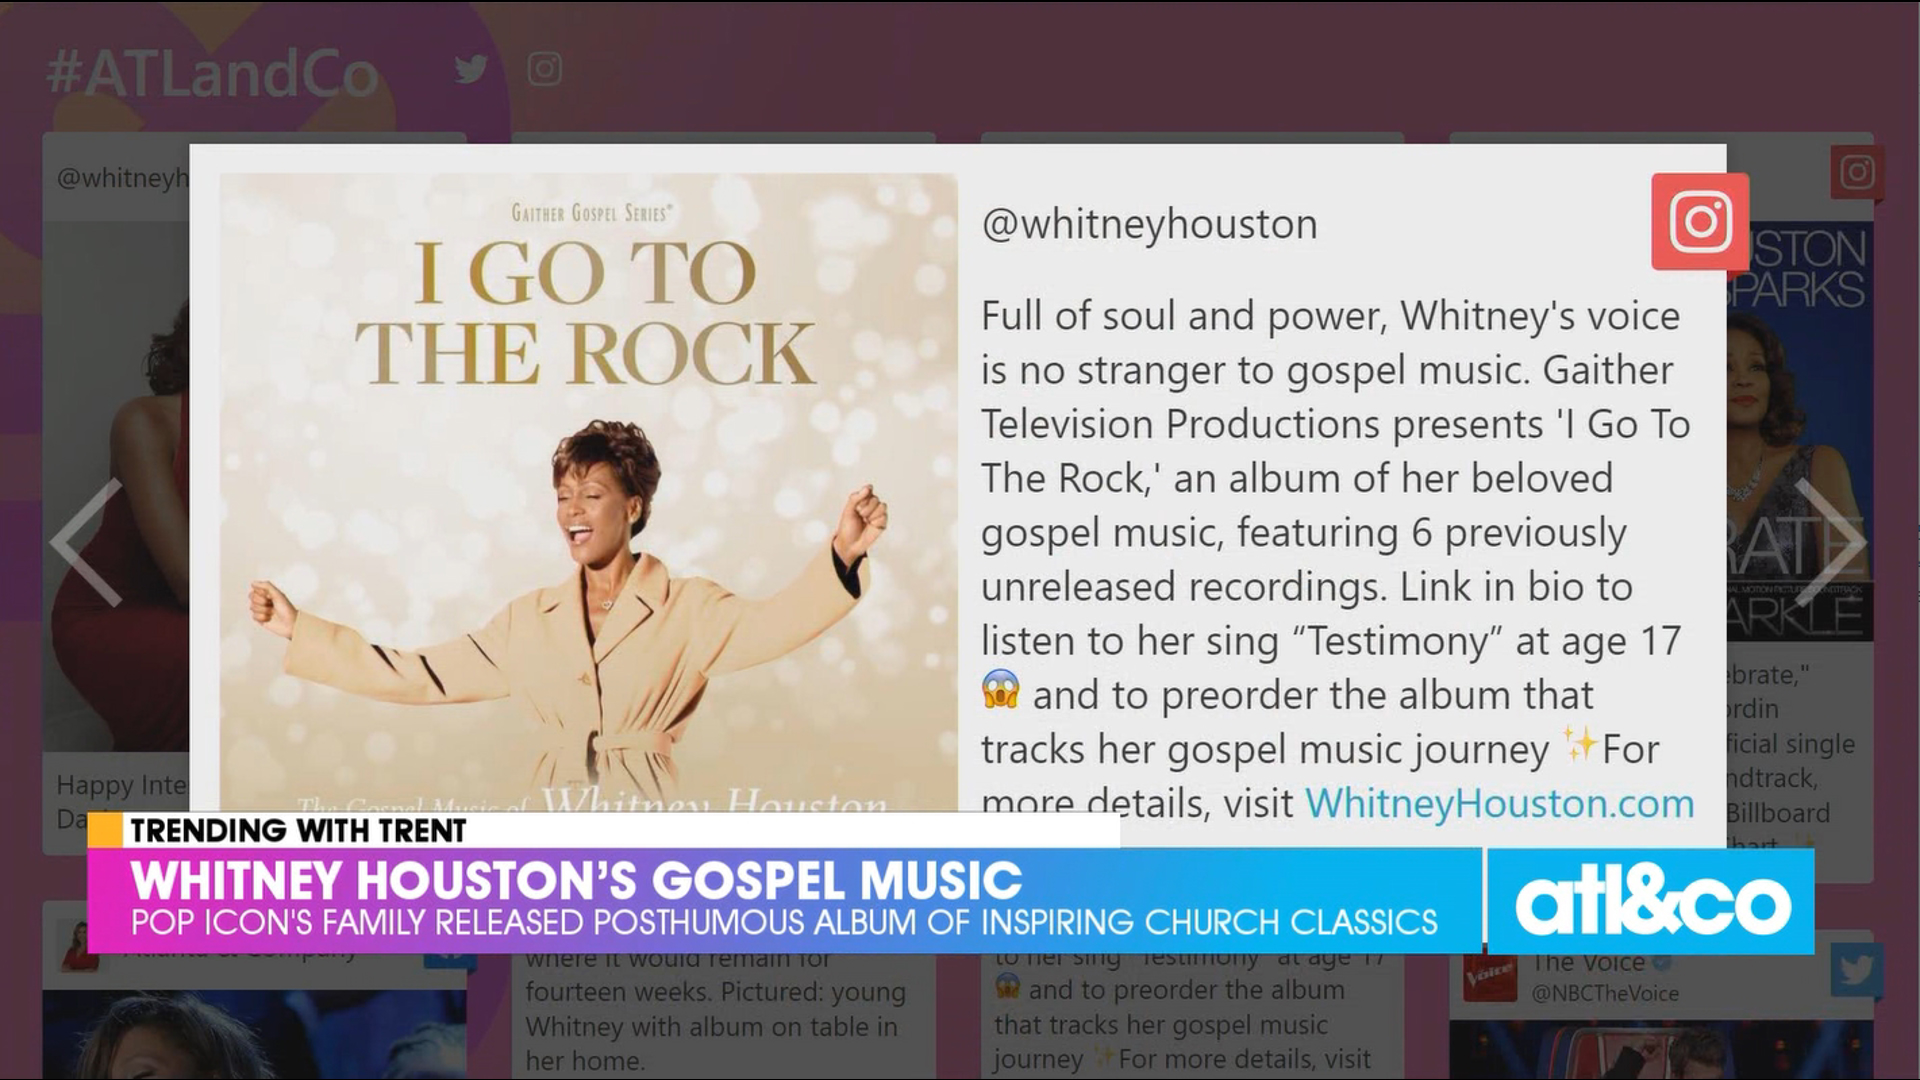 The family of superstar Whitney Houston just released a collection of her gospel recordings.